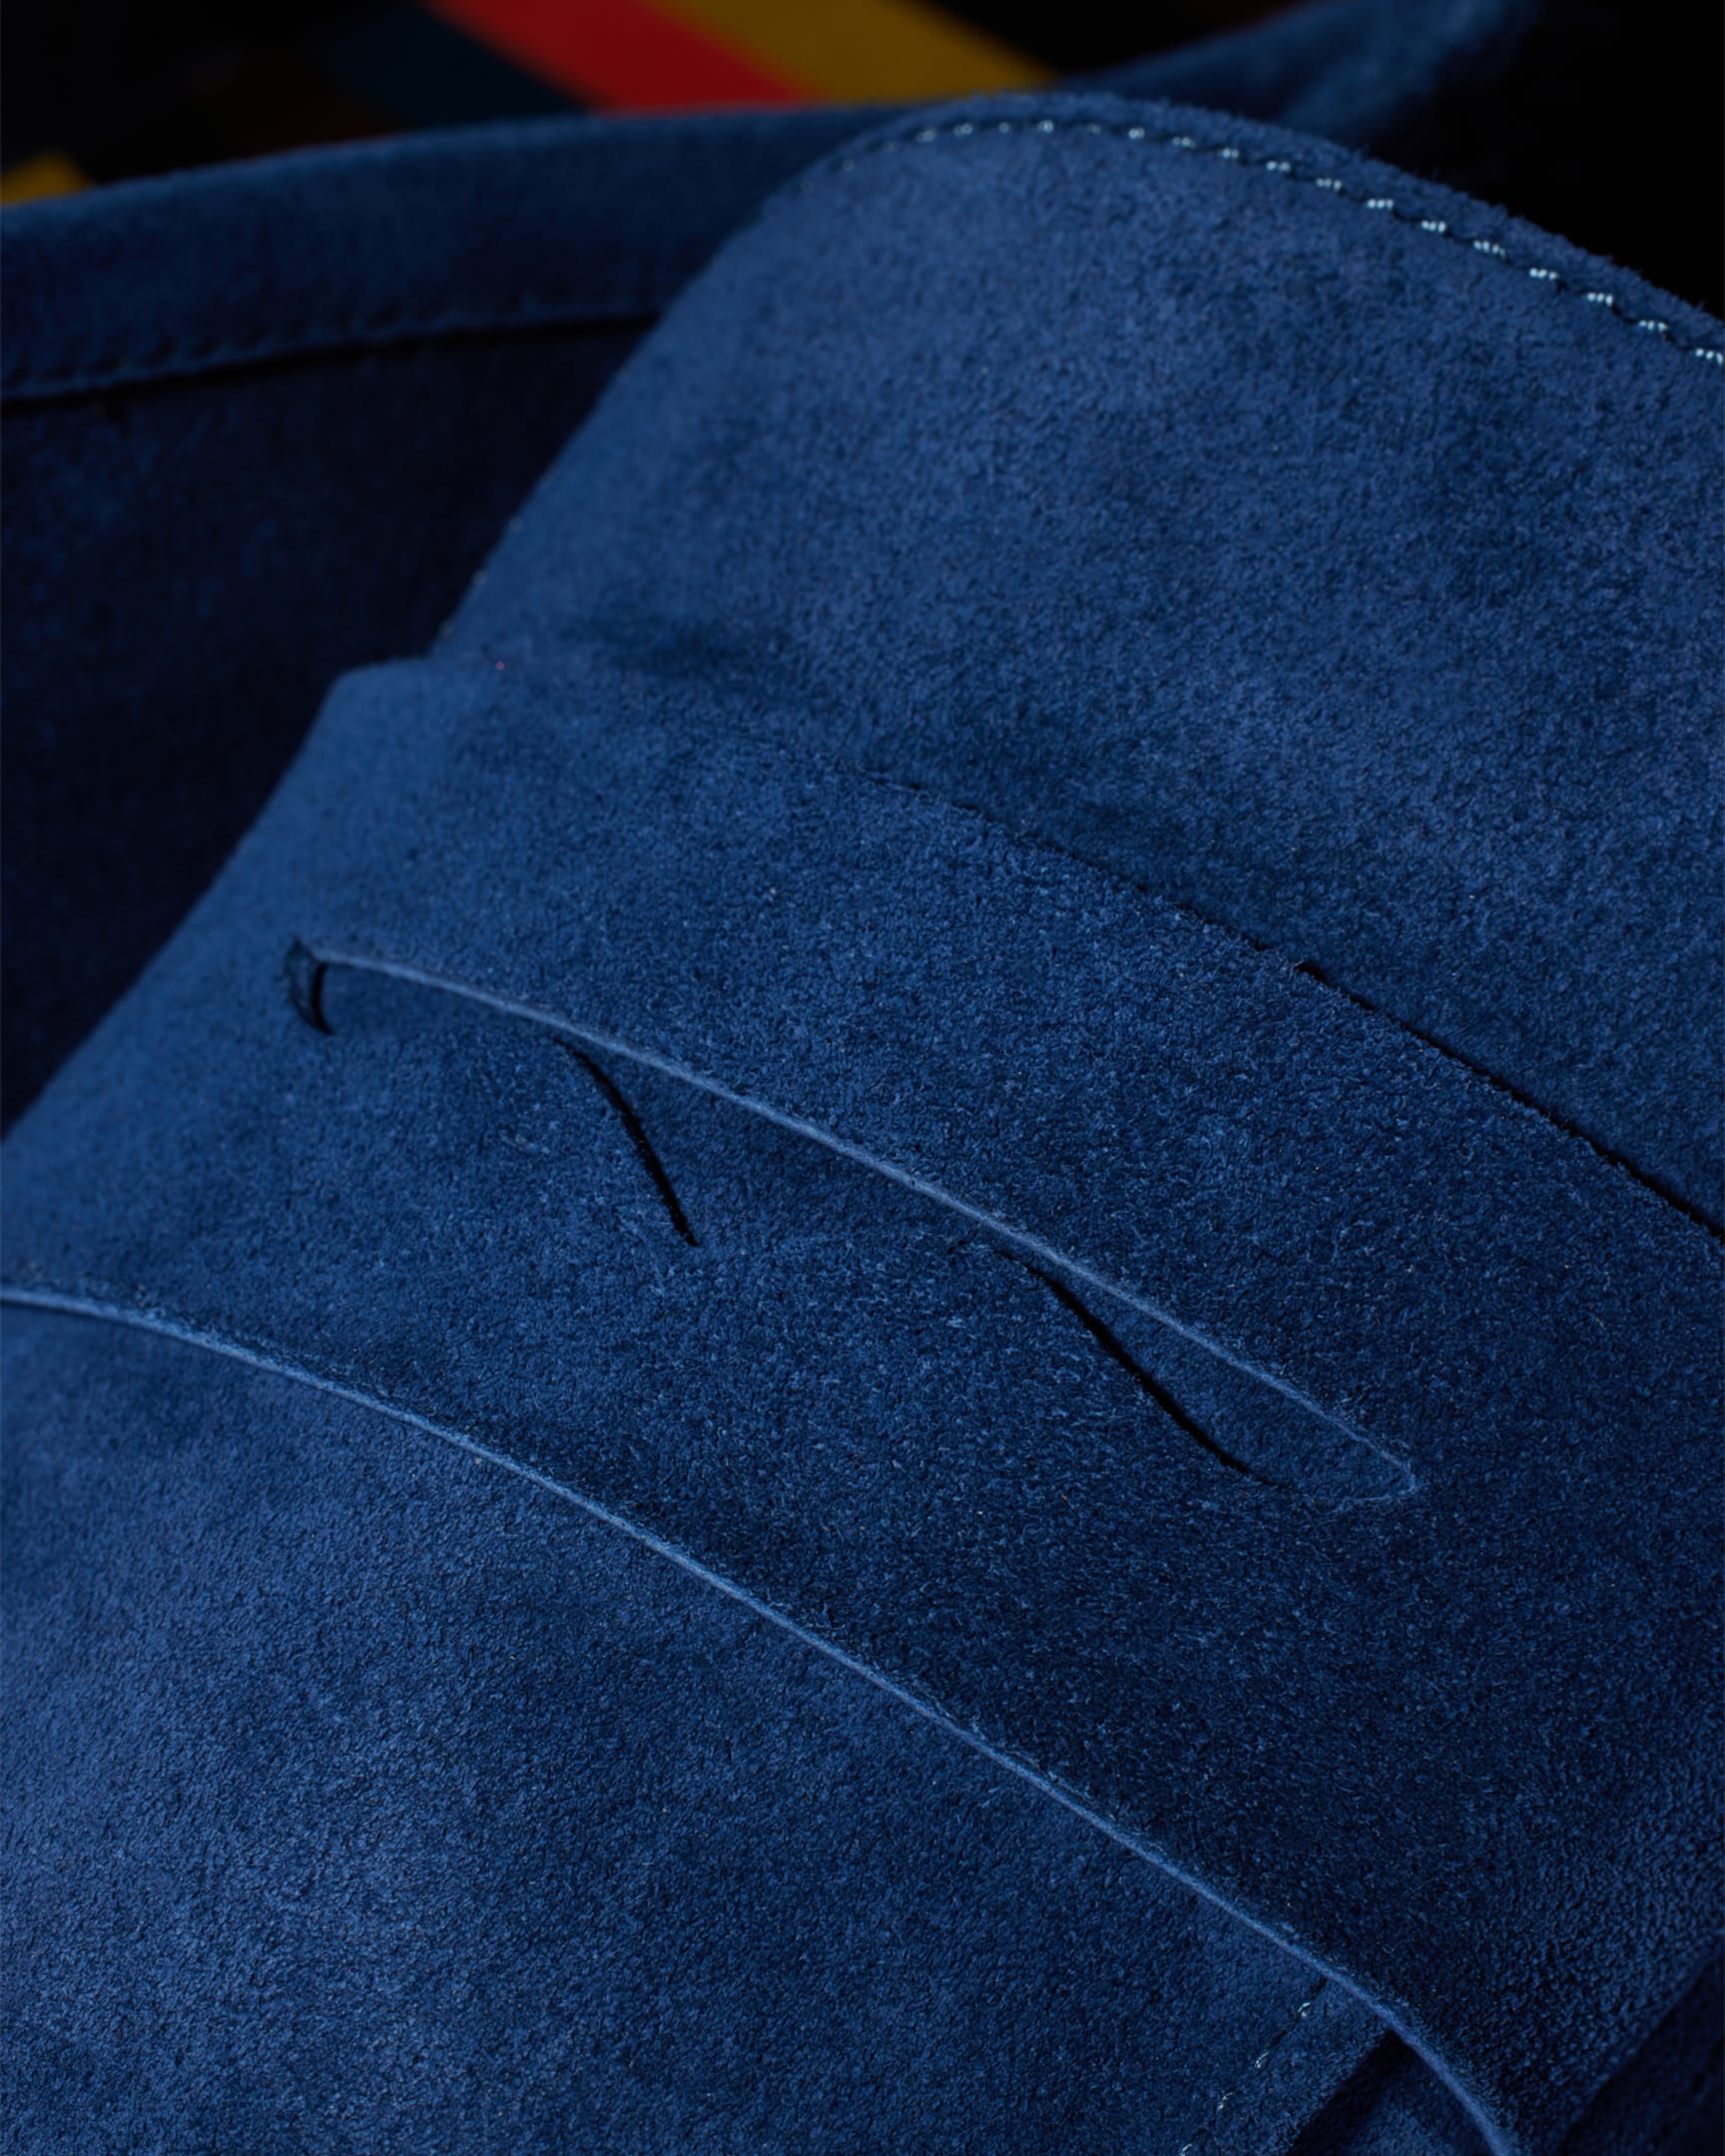 Detail View - Blue Suede 'Figaro' Loafers Paul Smith